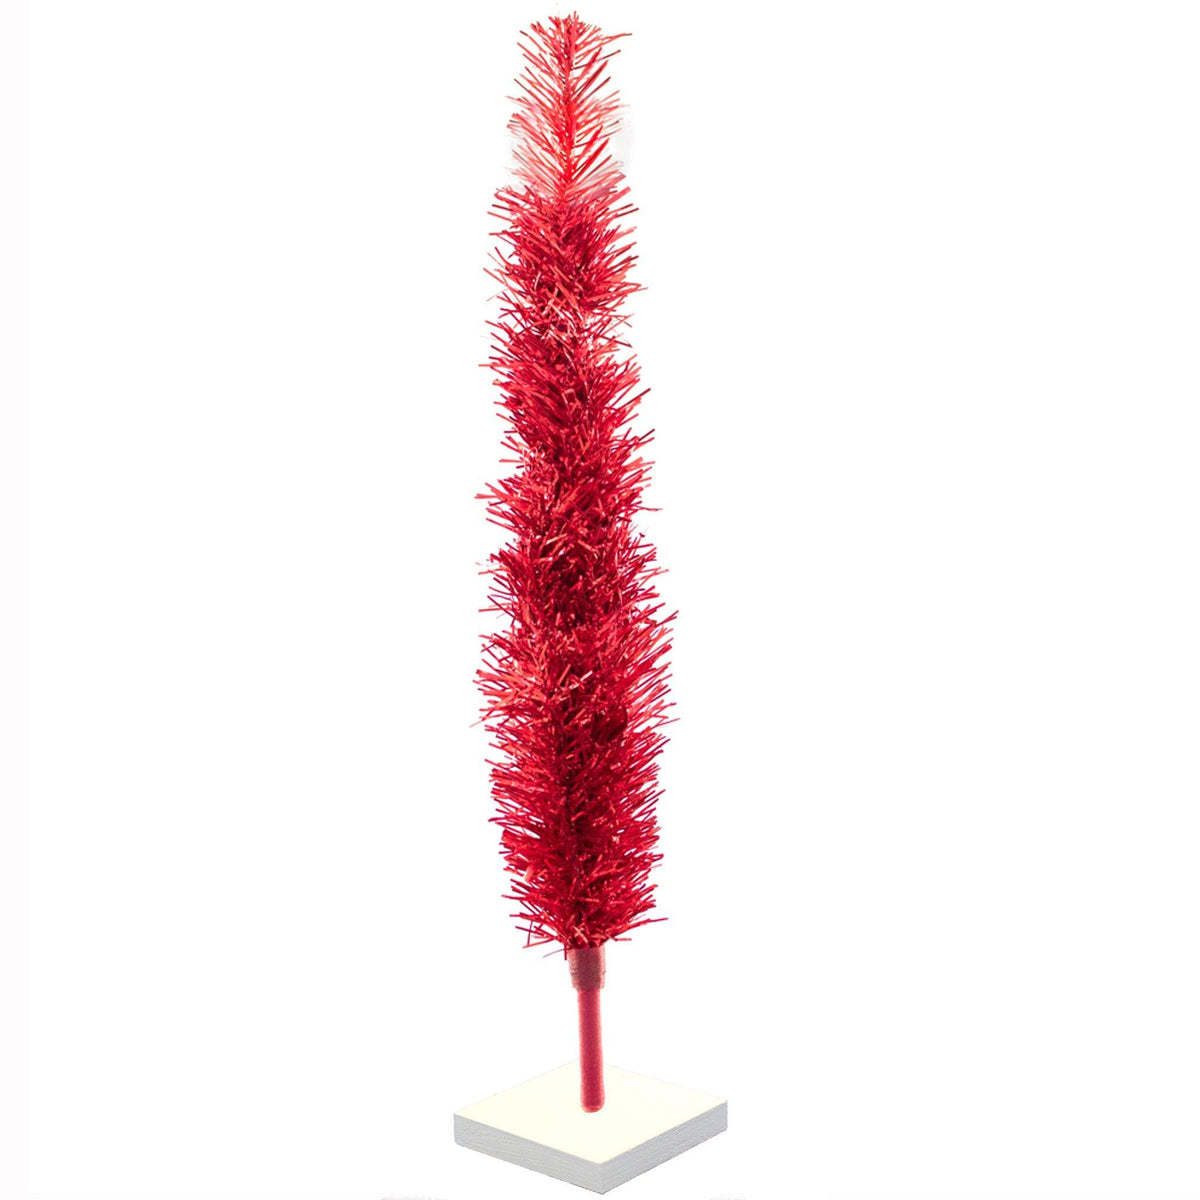 All Lee Display's tinsel trees have folding branches for easy assembly and storage